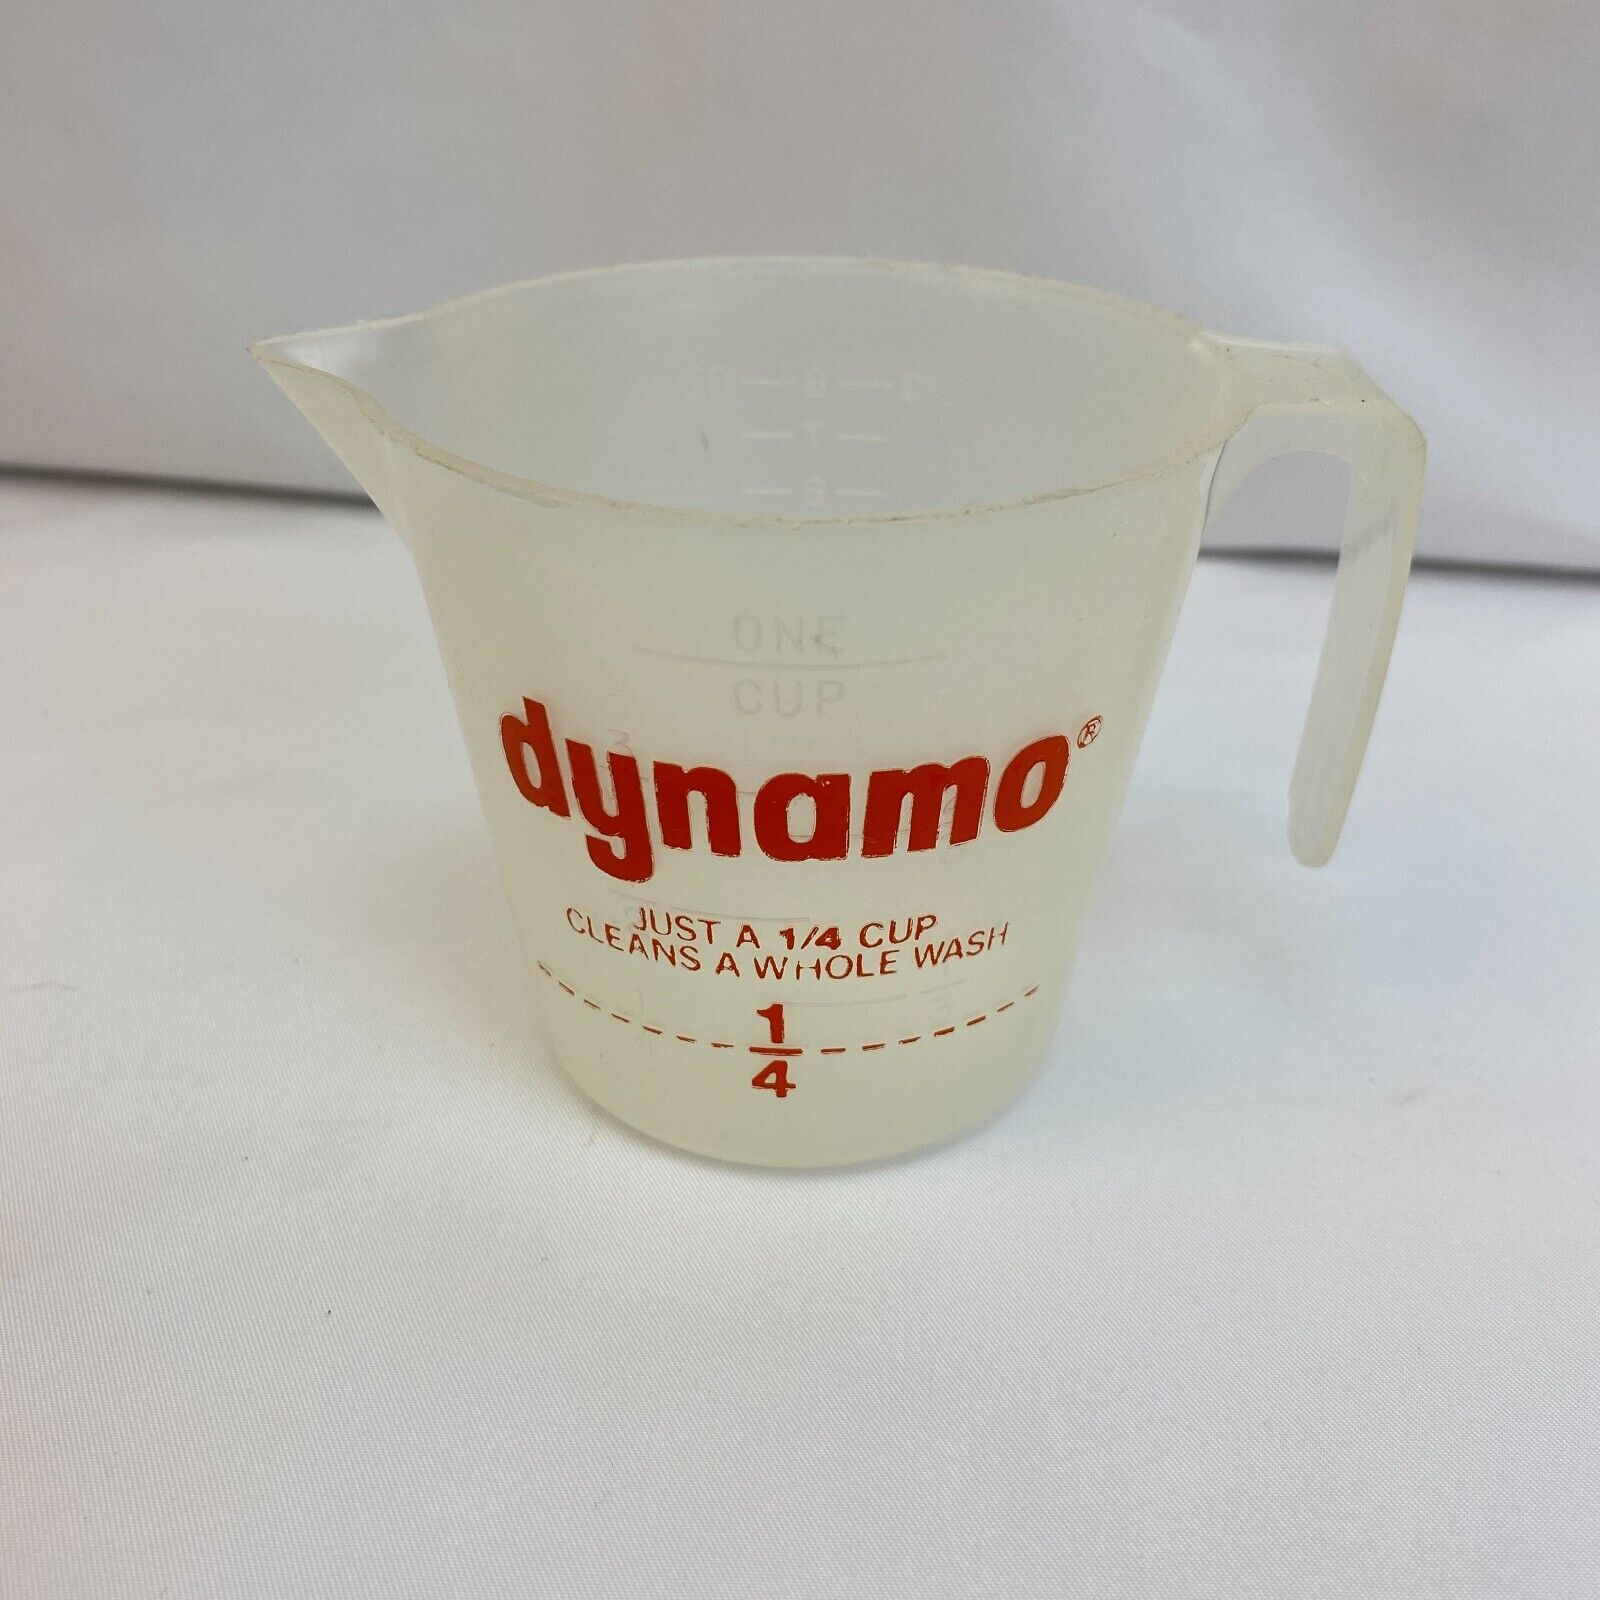 Vintage 1970s Dynamo Laundry Detergent Clear Plastic Measuring Cup - 8 Oz Marked